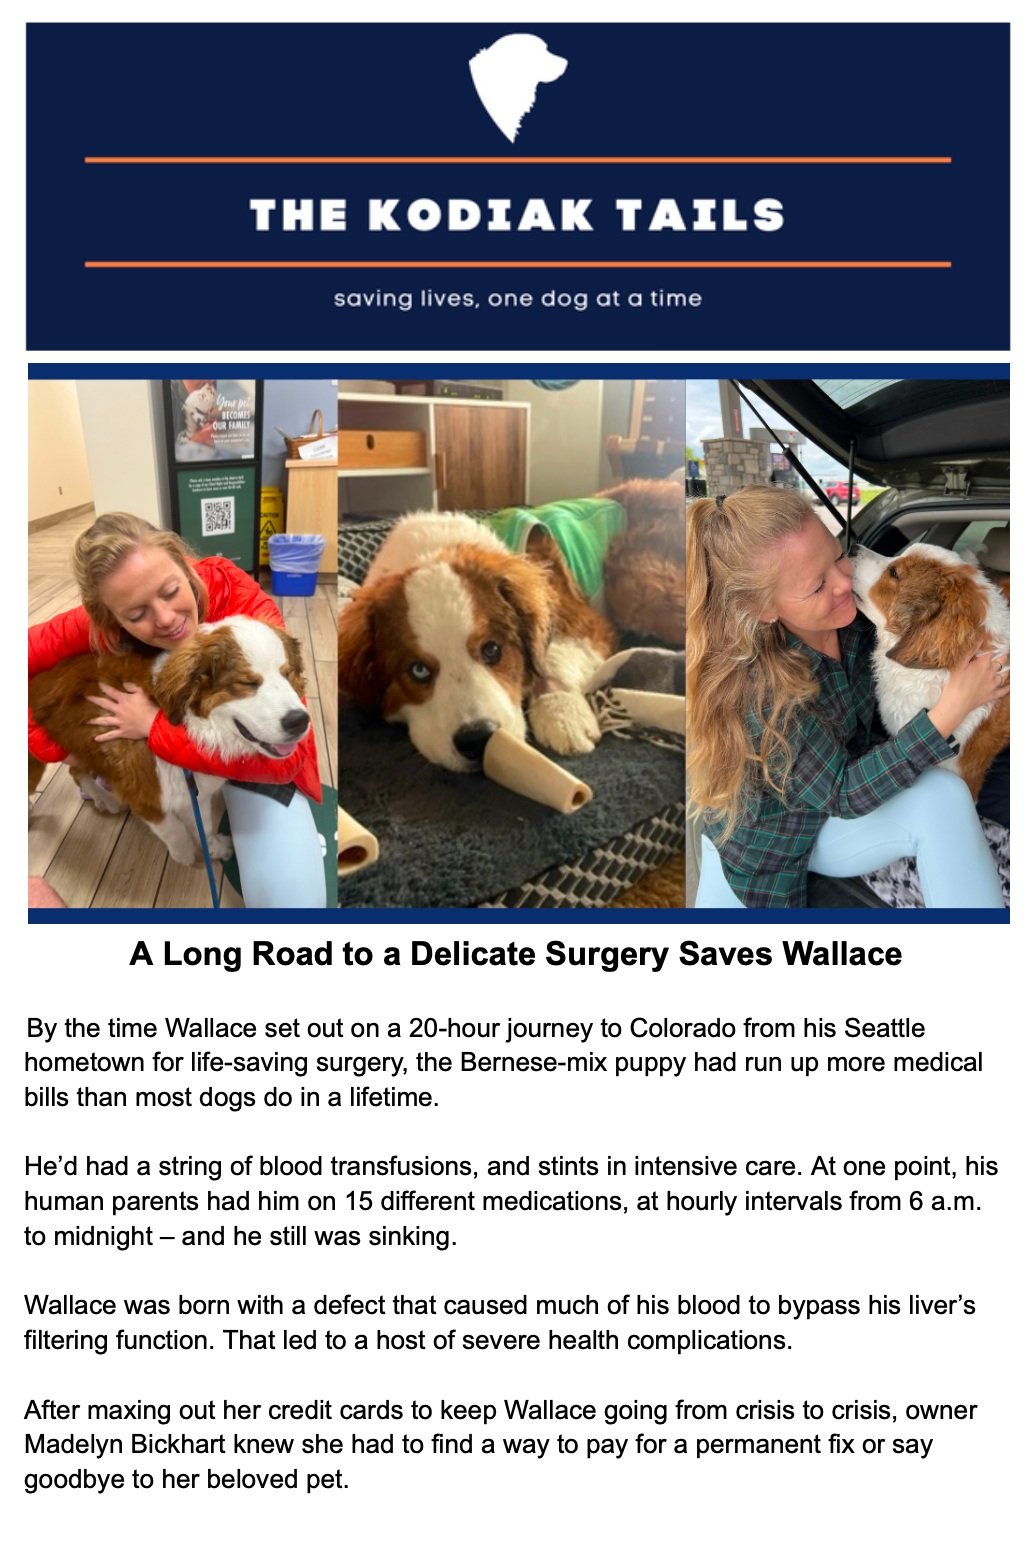 A Long Road to a Delicate Surgery Saves Wallace